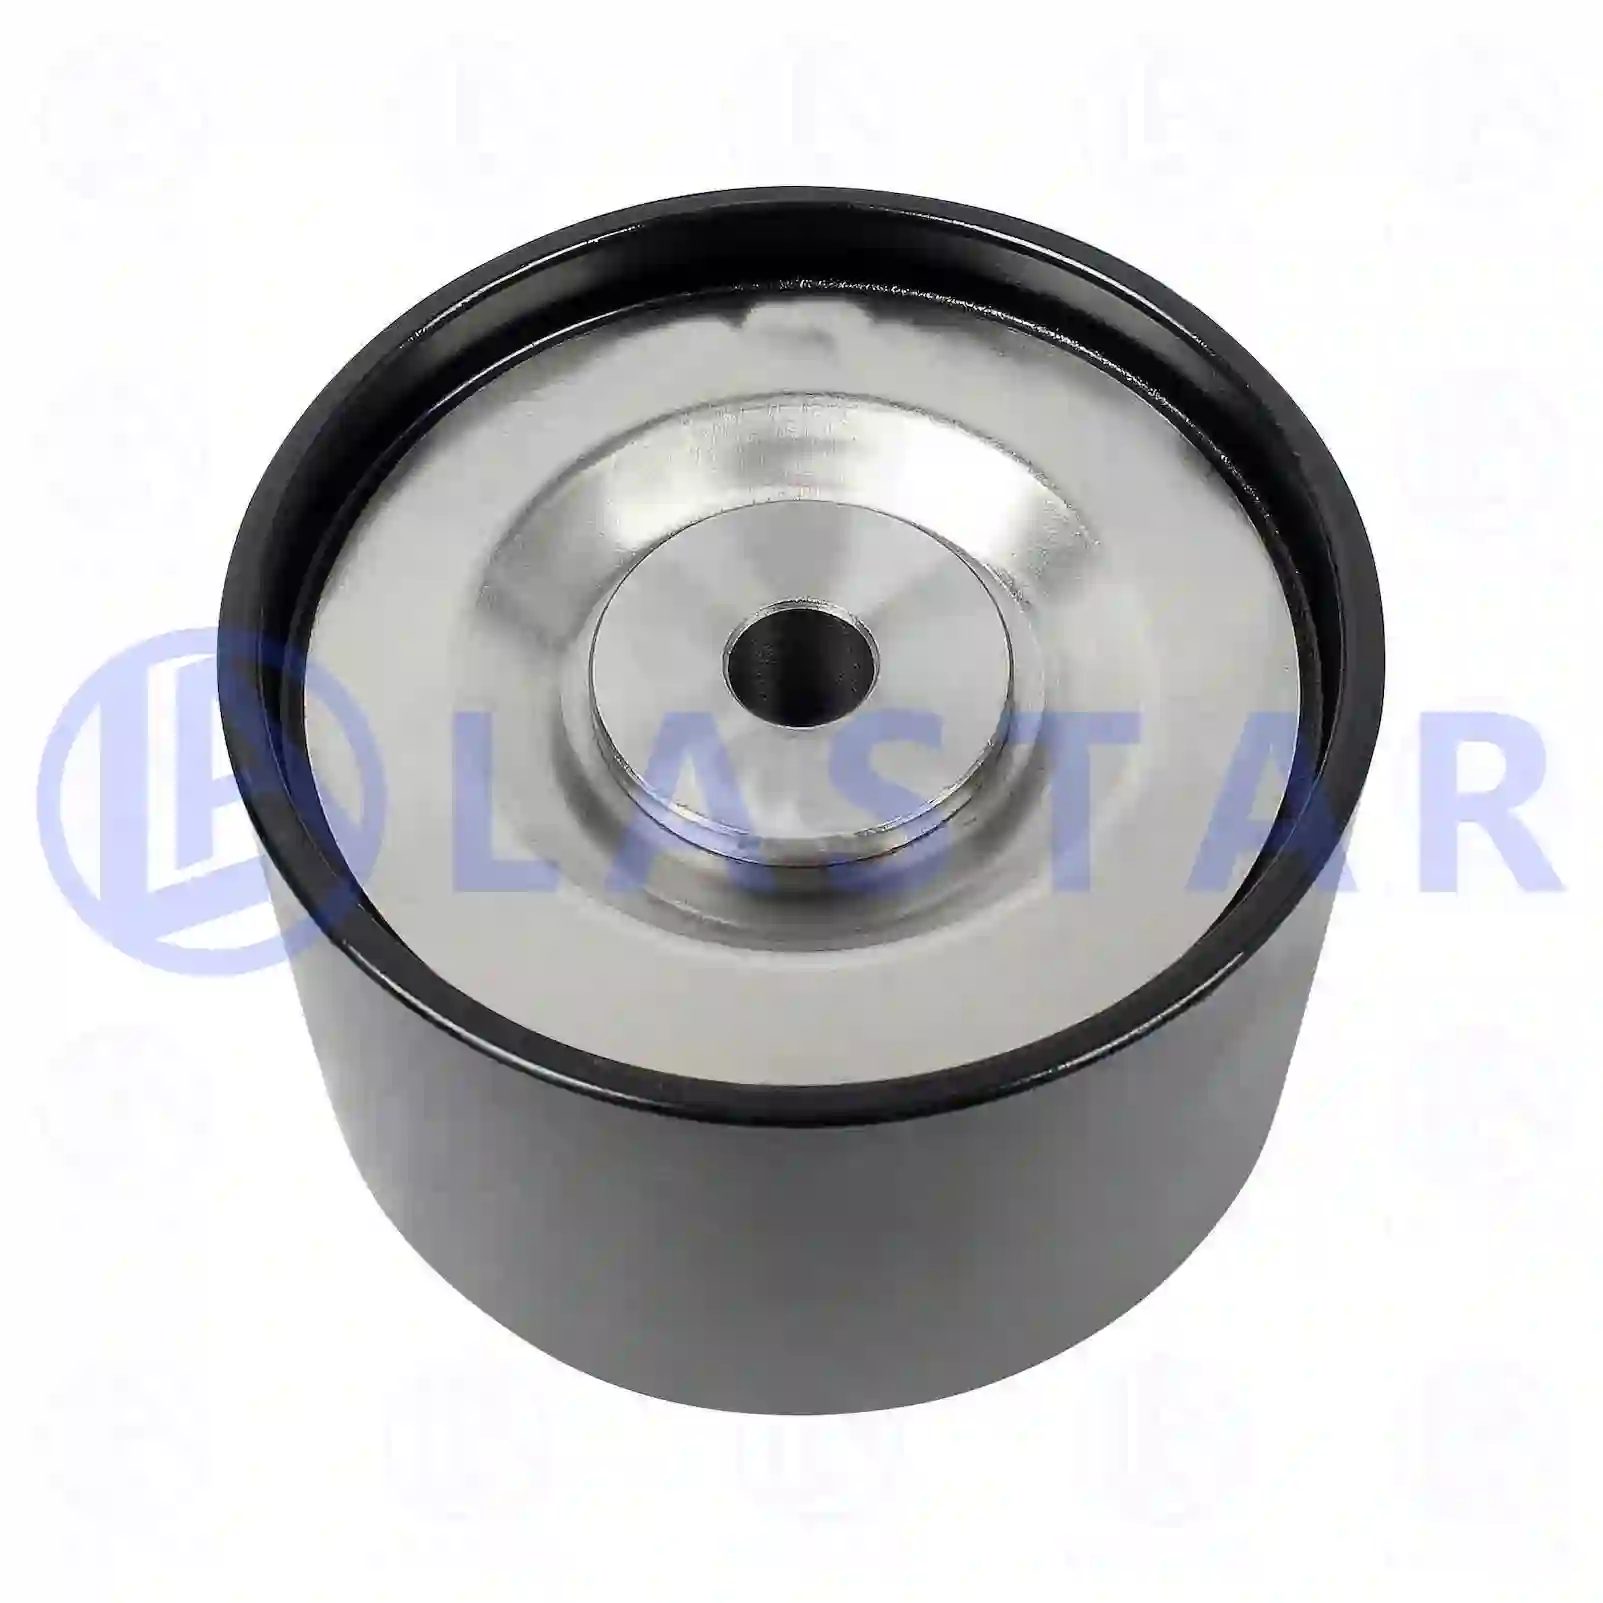 Tension roller, new version, 77707960, 0005501733, 0005502333, 0005502533, ZG02177-0008 ||  77707960 Lastar Spare Part | Truck Spare Parts, Auotomotive Spare Parts Tension roller, new version, 77707960, 0005501733, 0005502333, 0005502533, ZG02177-0008 ||  77707960 Lastar Spare Part | Truck Spare Parts, Auotomotive Spare Parts